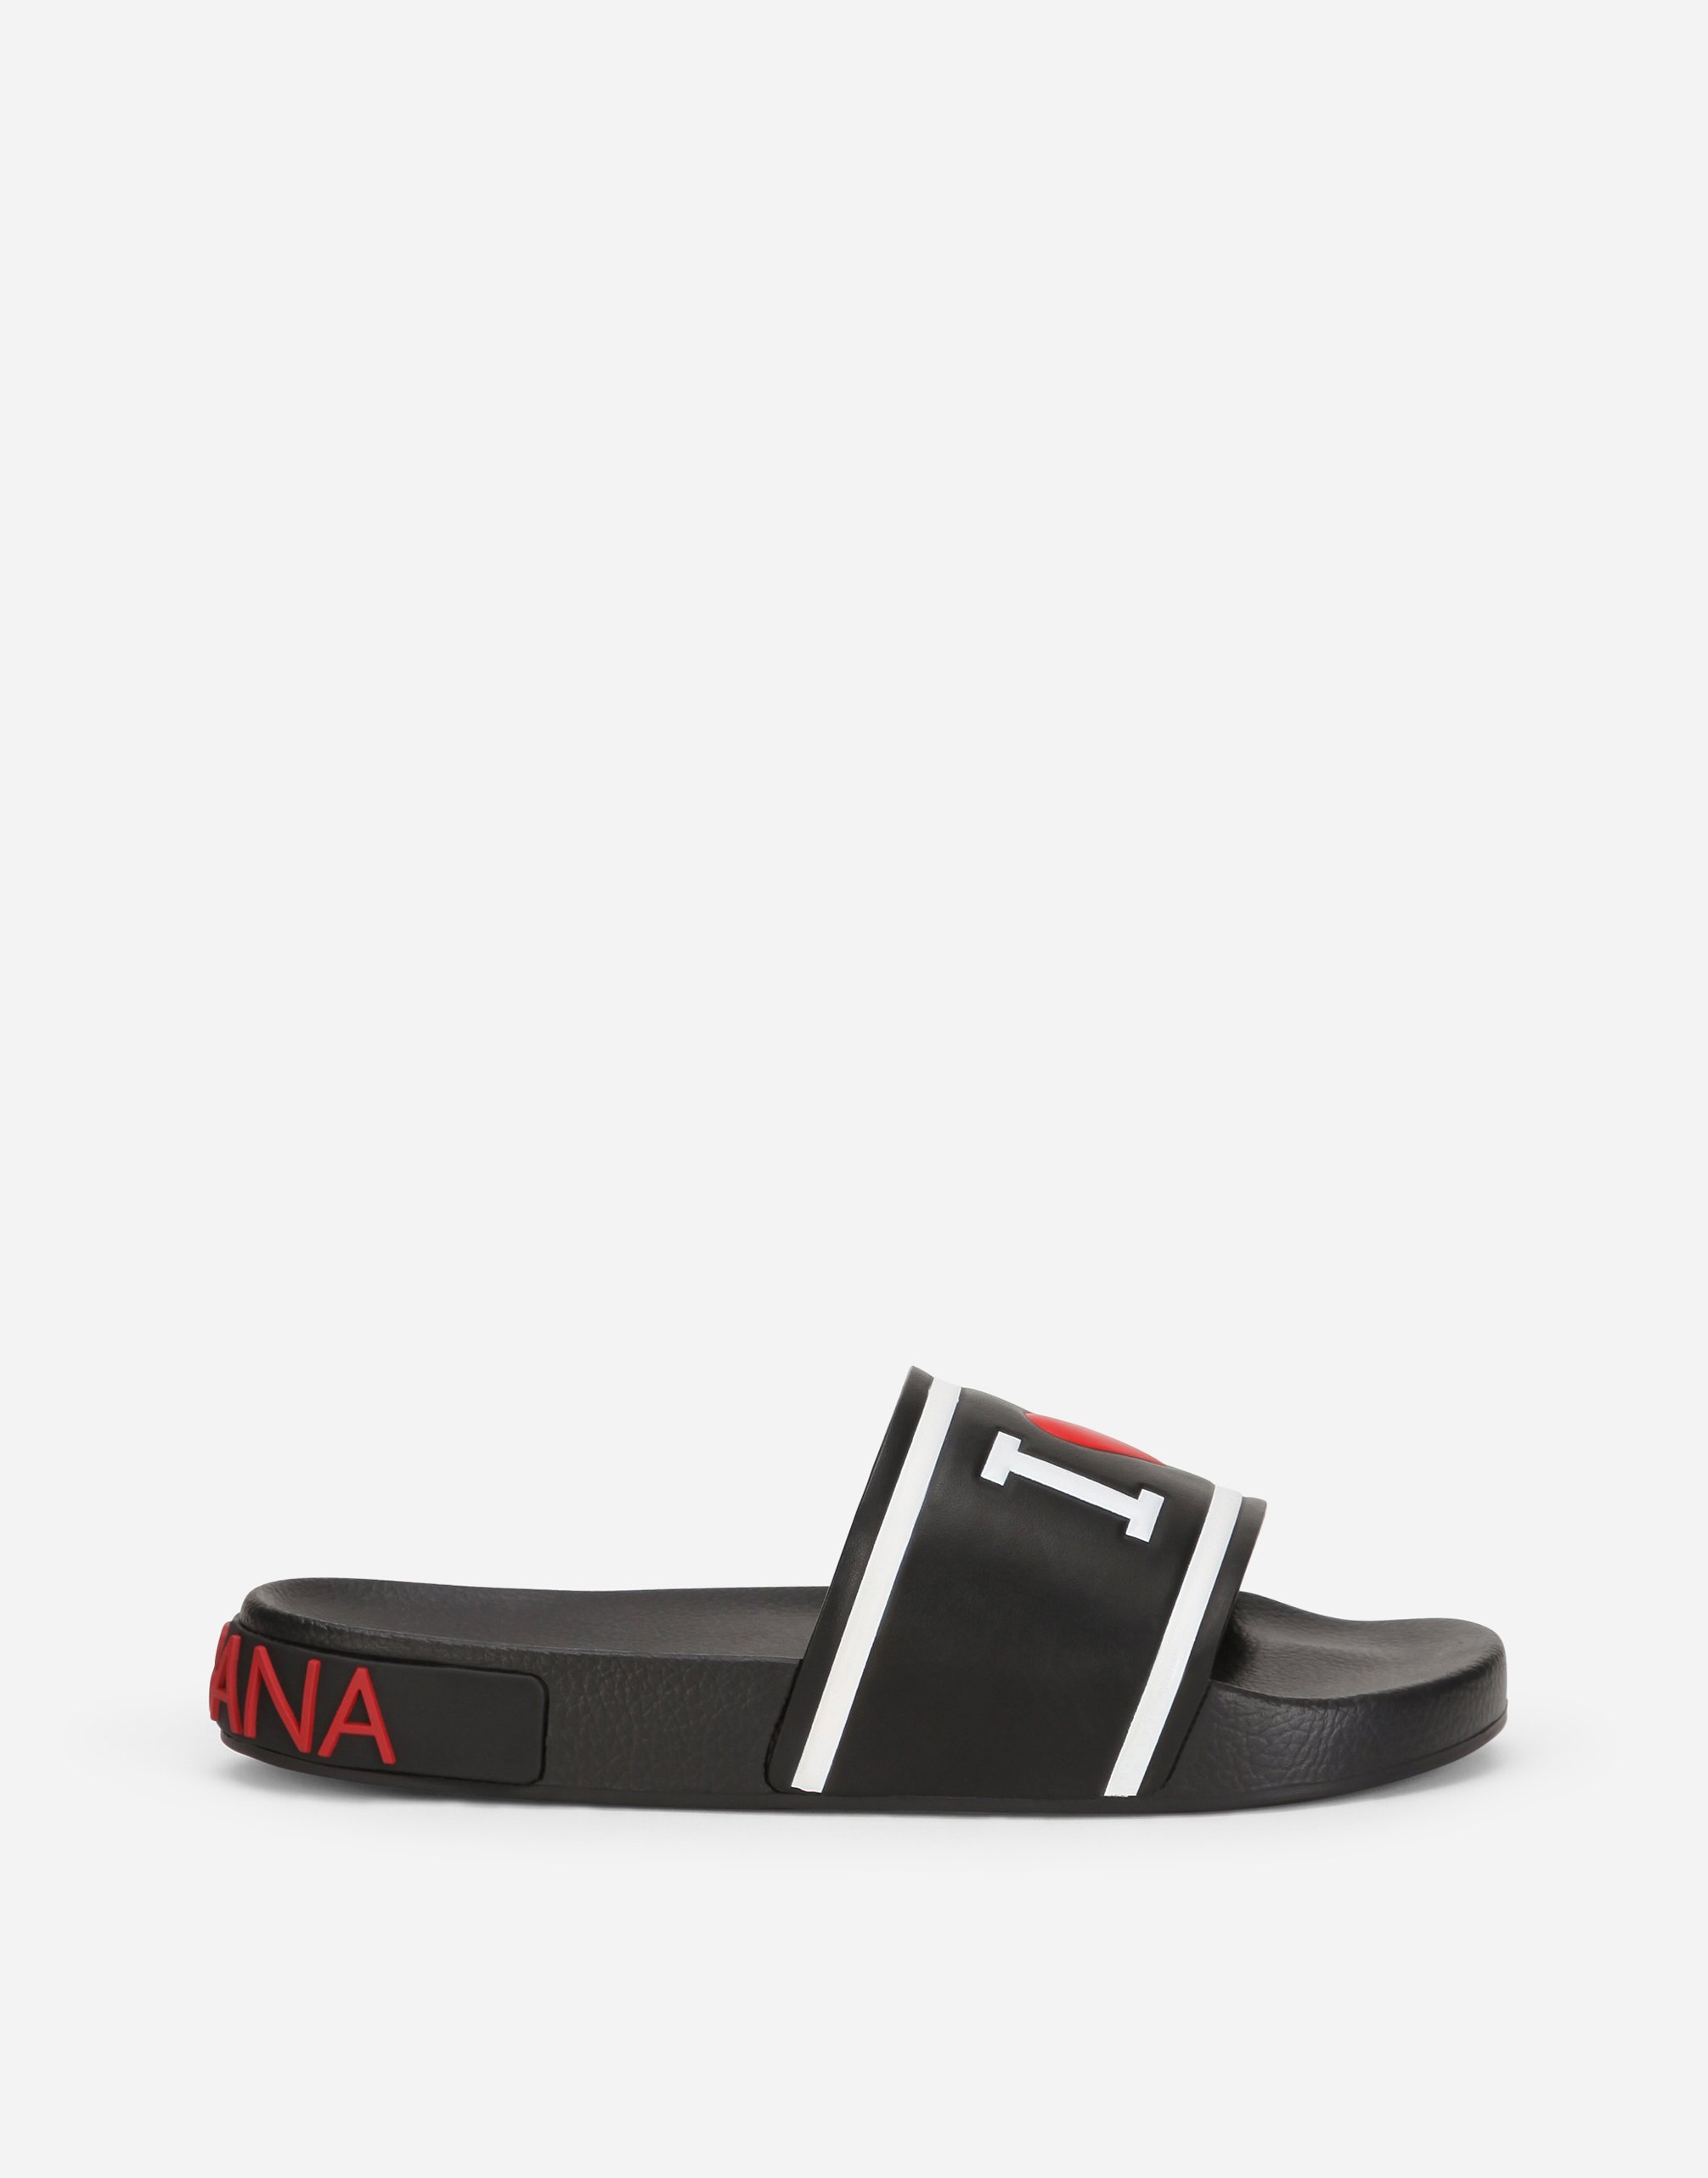 Rubber beachwear slides with high-frequency detailing  in Multicolor